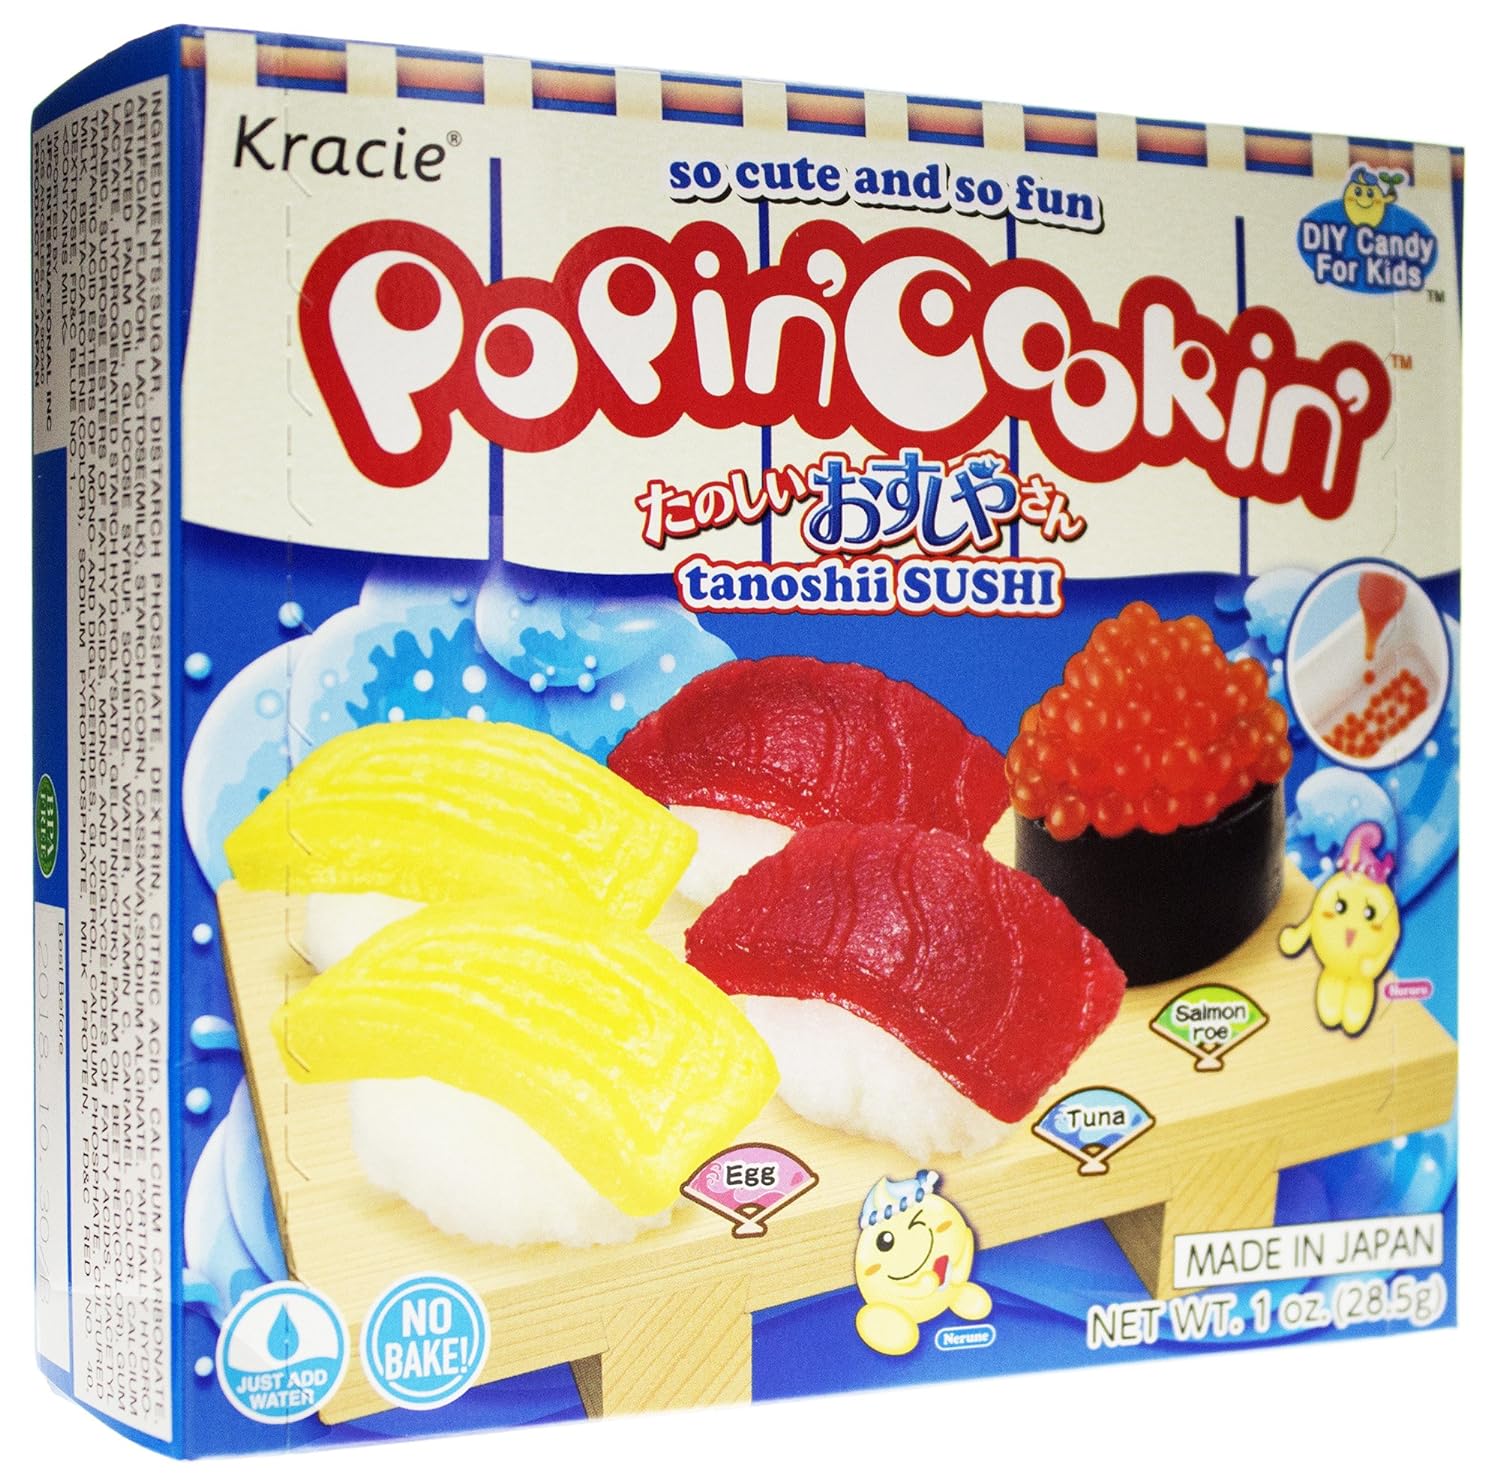 Kracie Popin Cookin Diy Candy for Kids, Sushi Kit, 1 Ounce